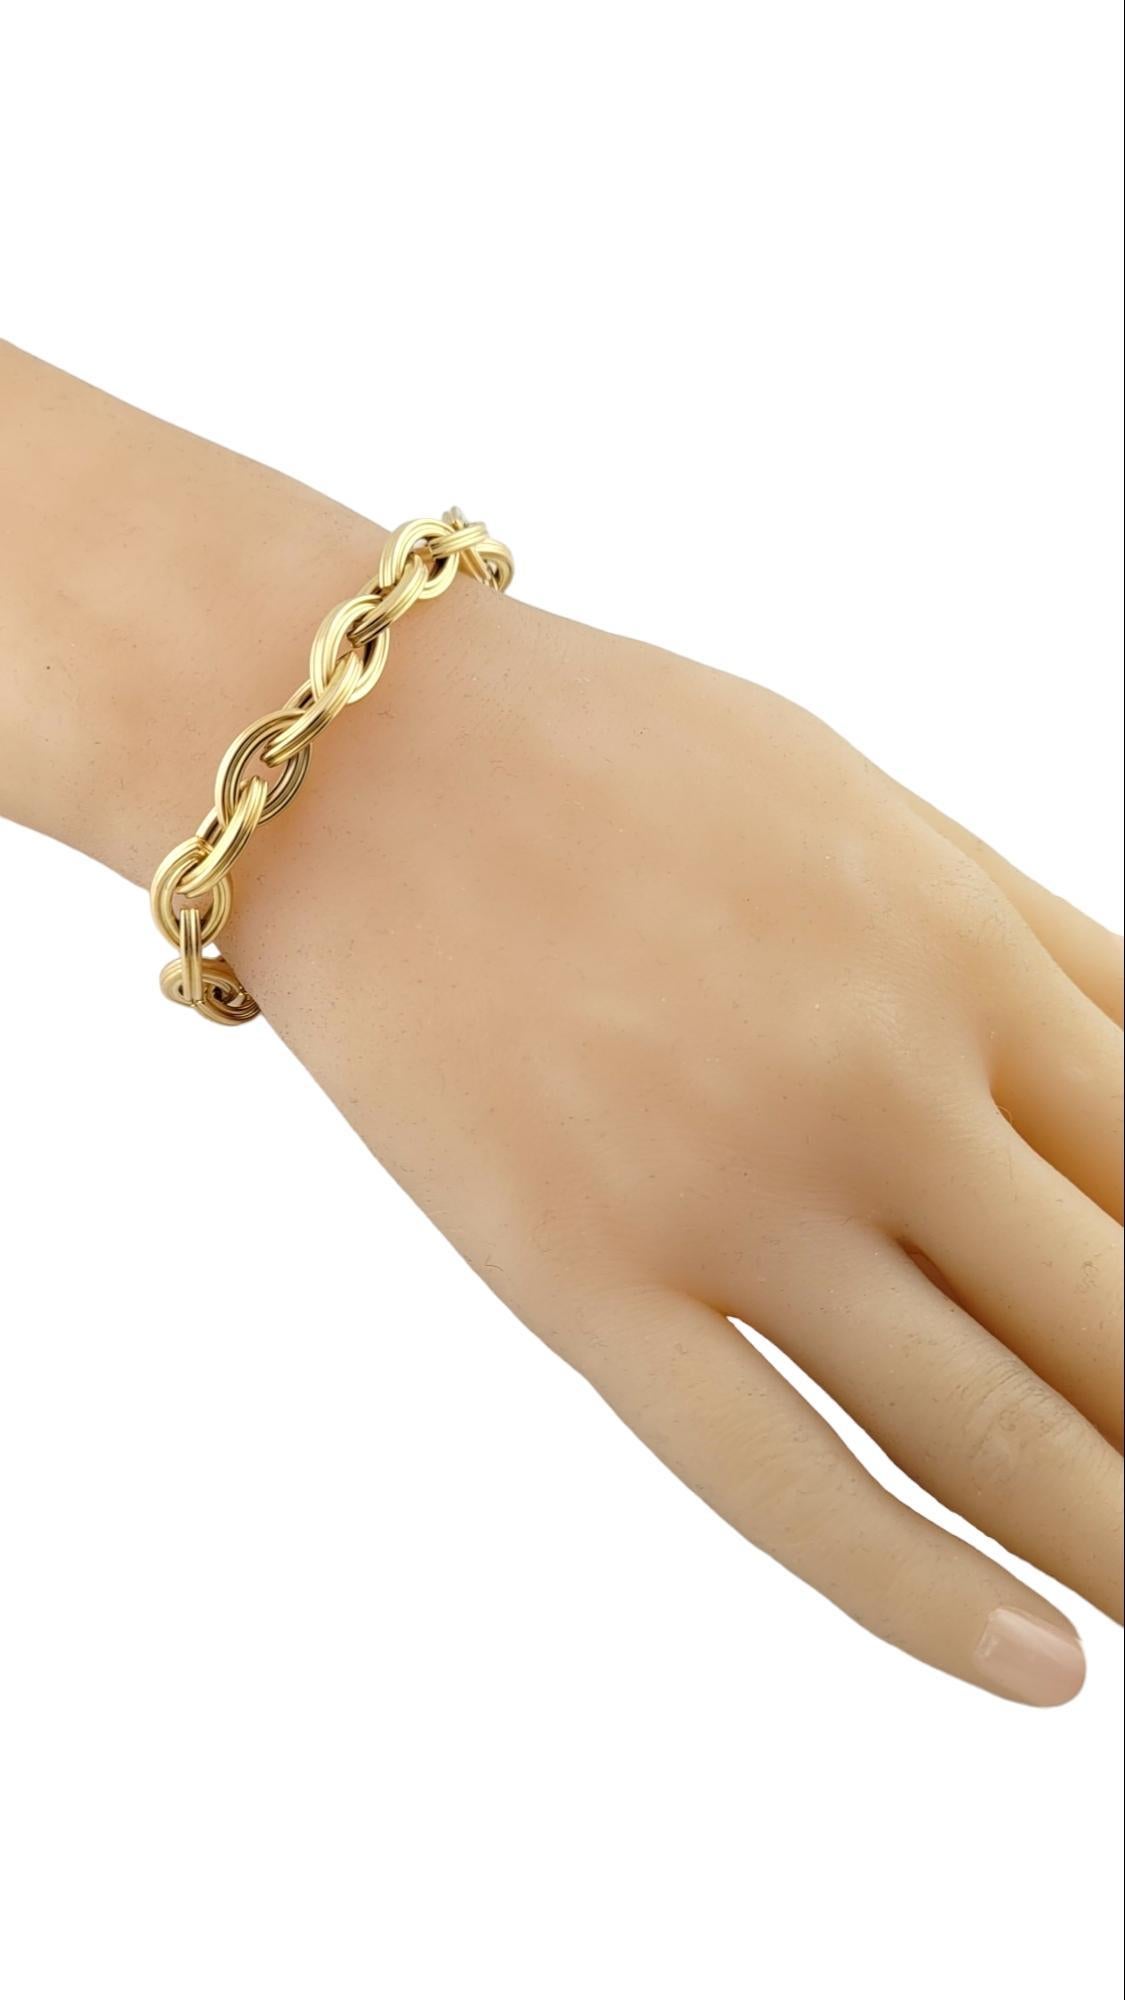 18K Textured Yellow Gold Link Bracelet #15866 For Sale 2